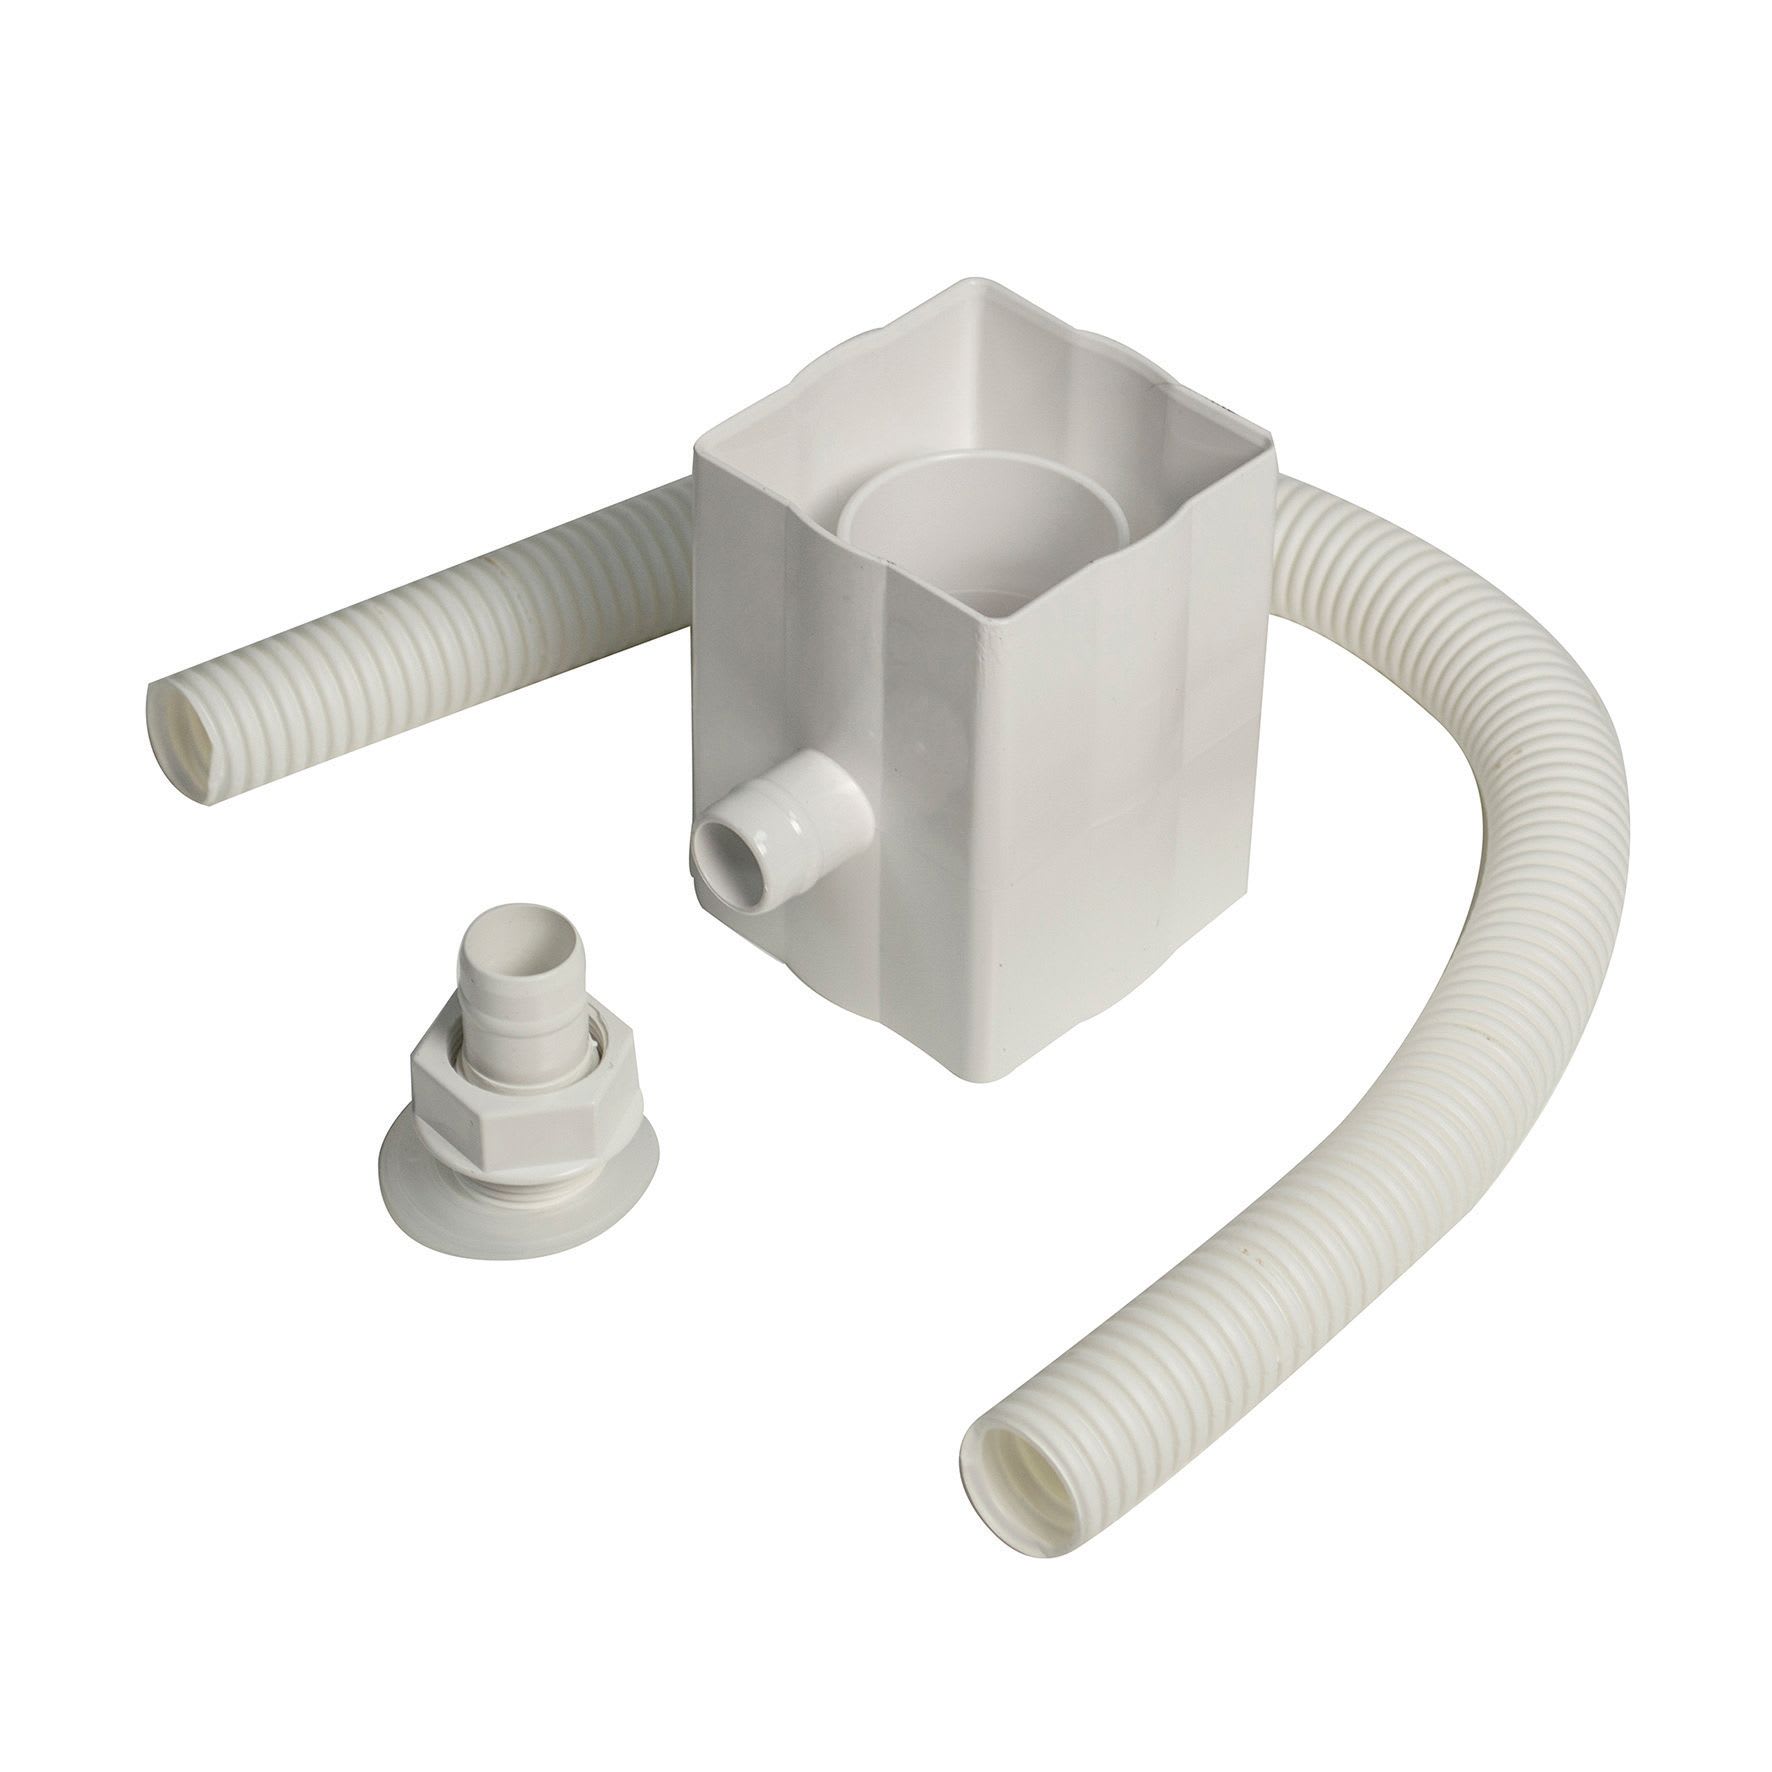 Floplast 68mm Round or 65mm Square Downpipe Water